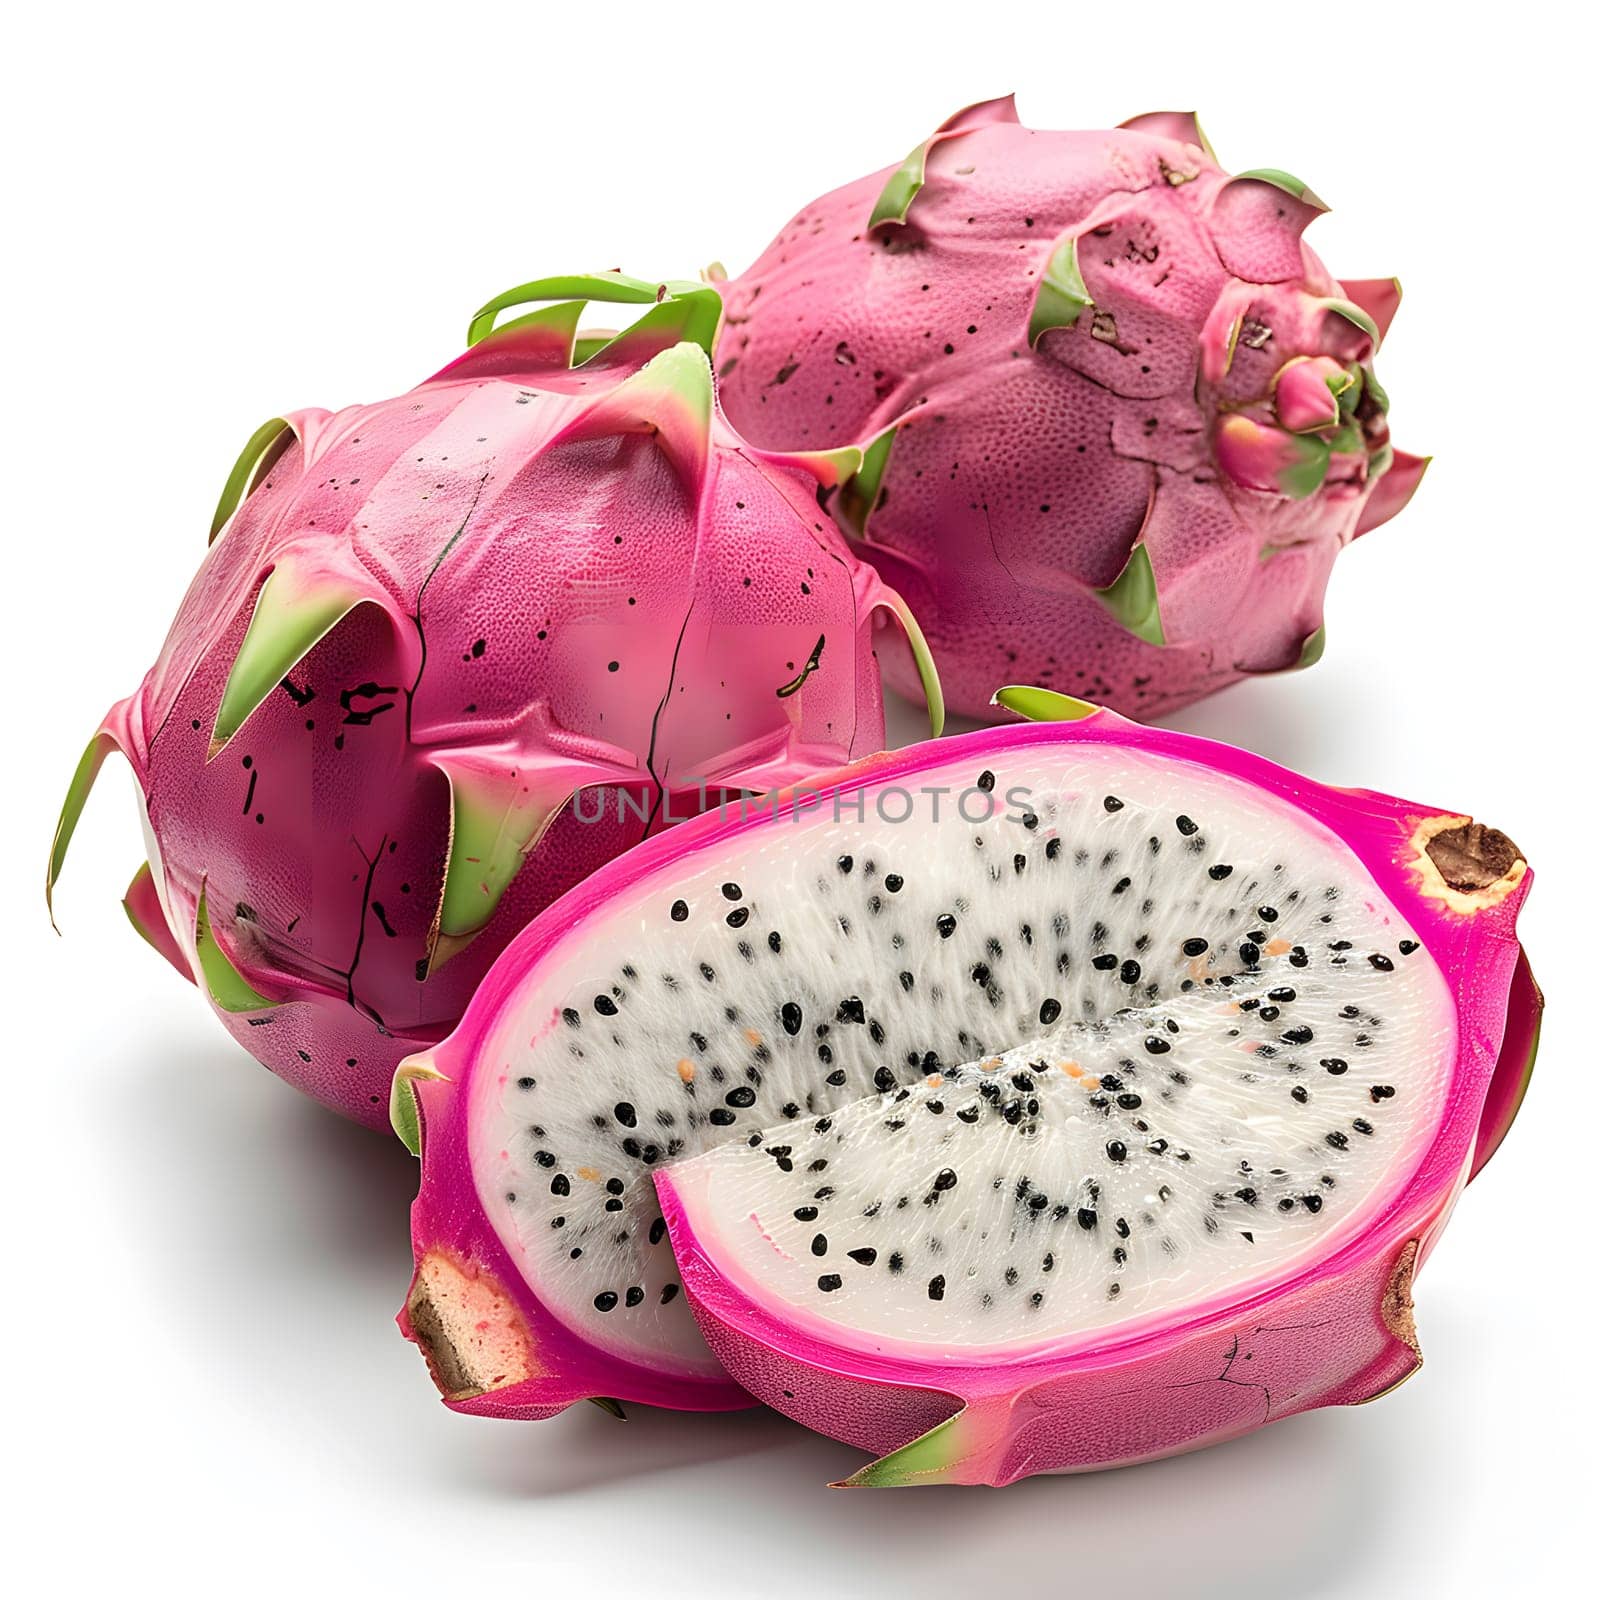 Watch a Costa Rican pitahaya, pink Dragonfruit cut in half on white background by Nadtochiy